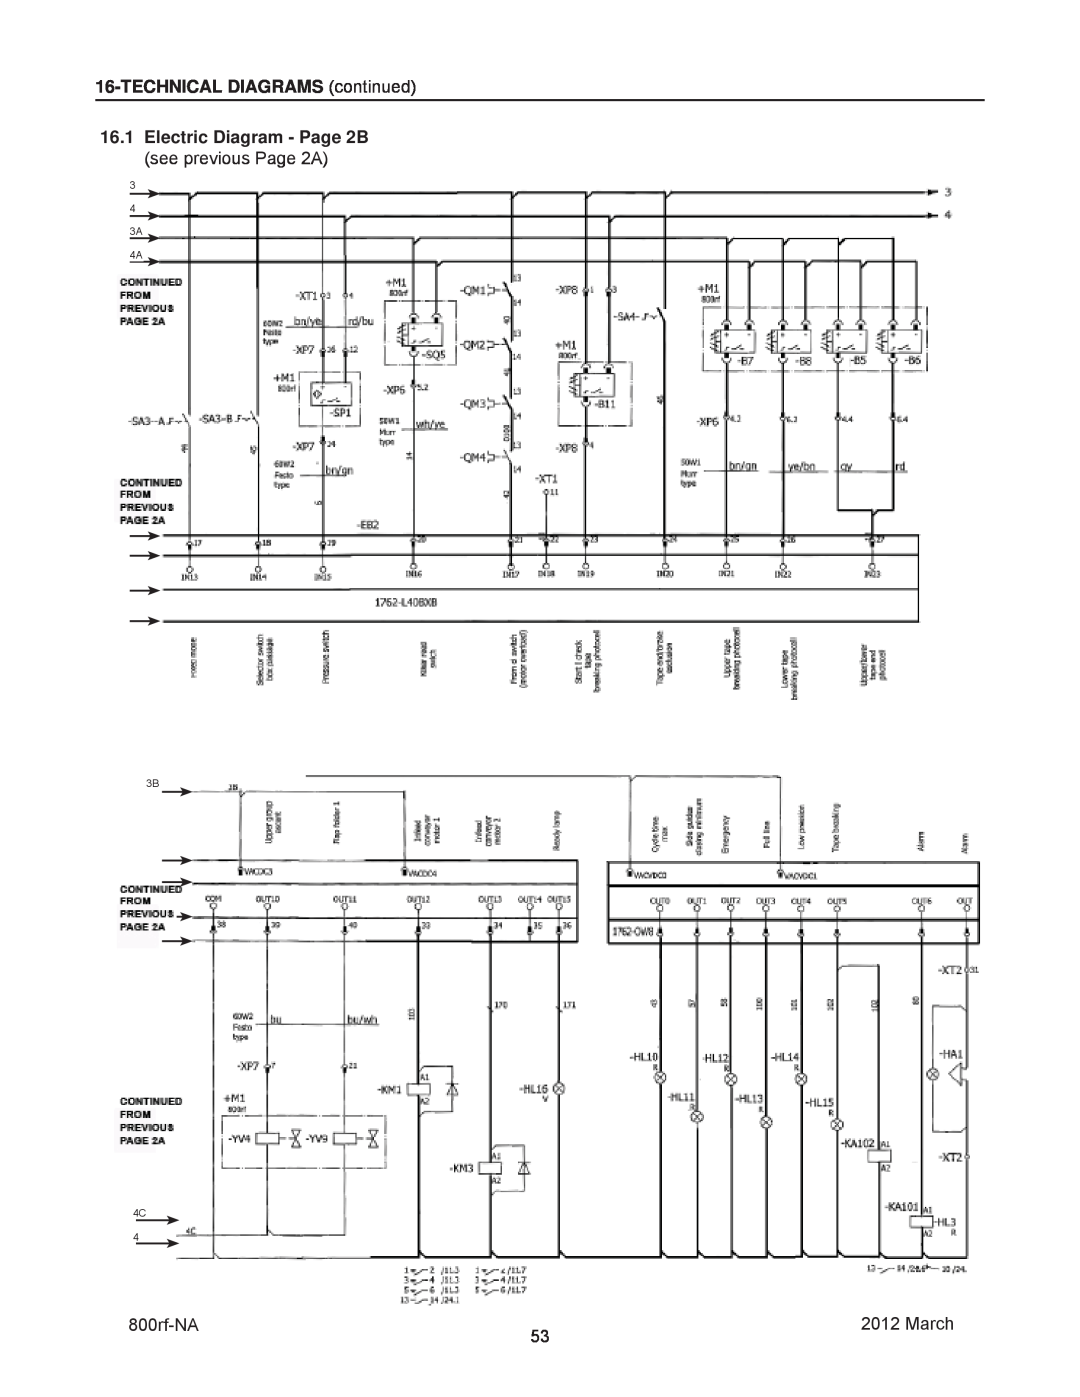 3M 800rf, 40800 manual TECHNICAL DIAGRAMS continued, Electric Diagram - Page 2B see previous Page 2A, 3A 4A 3B 4C 